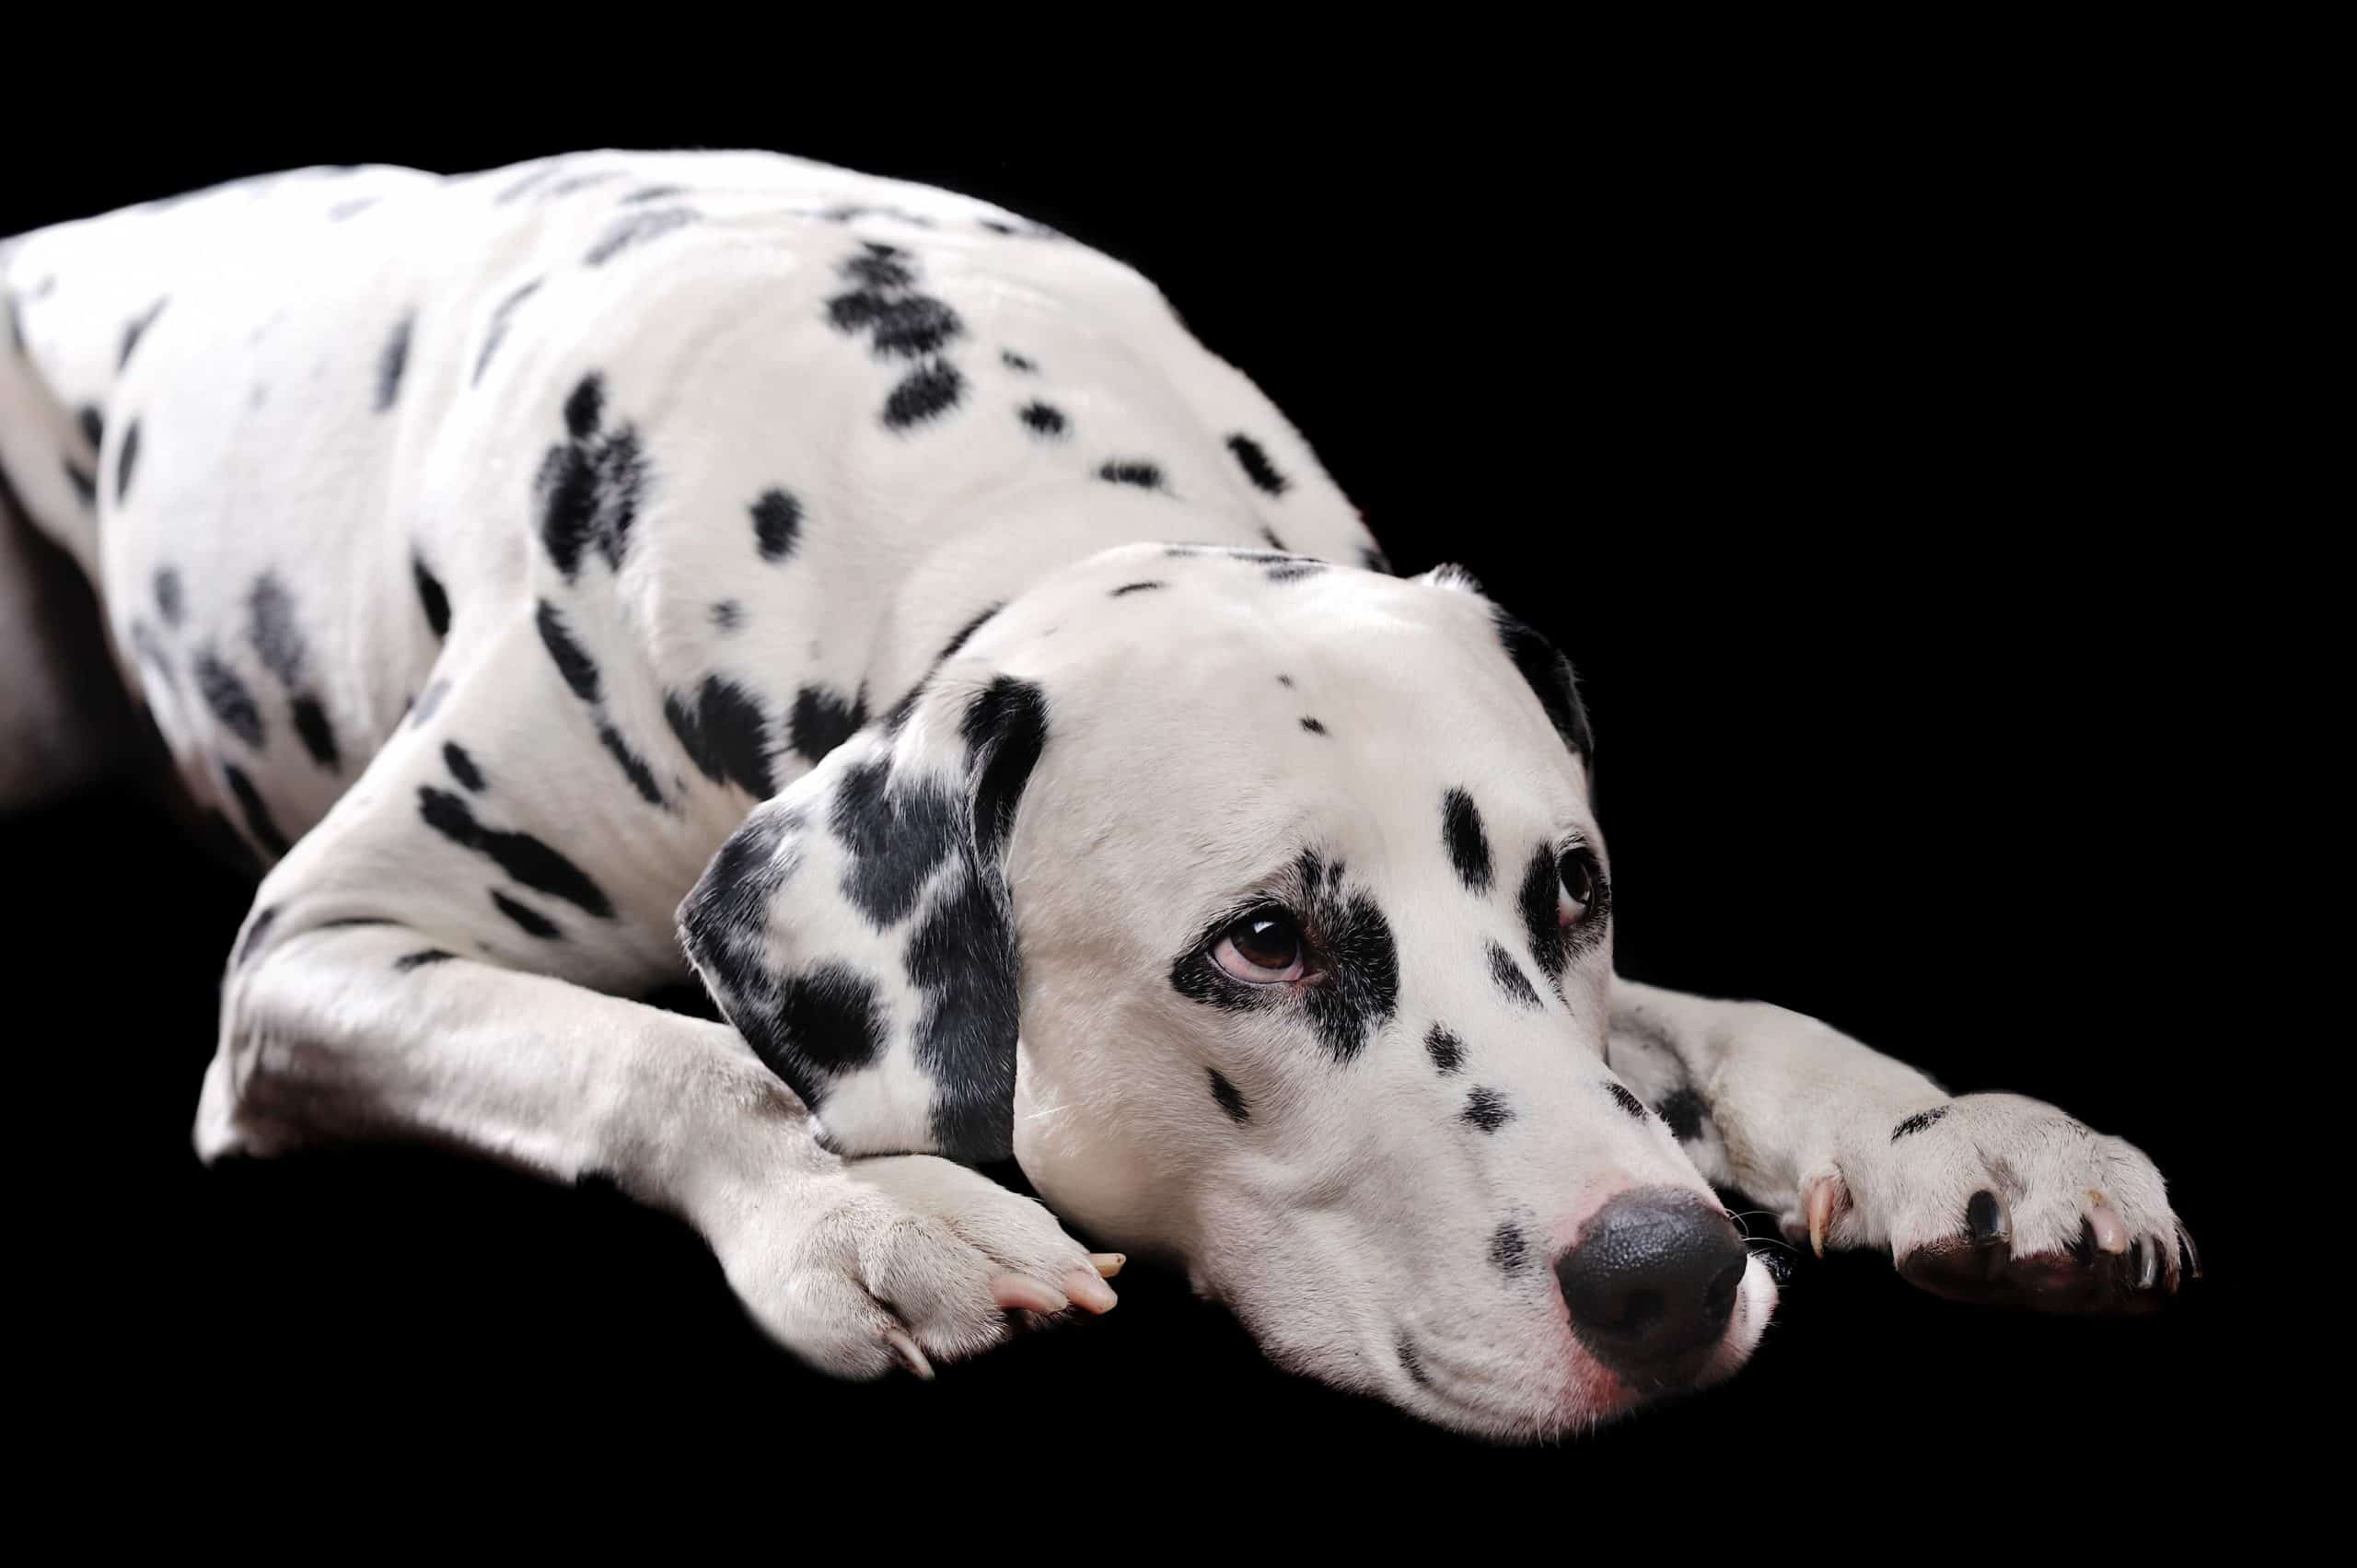 Sad Dalmatian on black background. Dalmatians, Jack Russel Terriers, and Bulldogs, experience urate crystals due to a genetic condition.